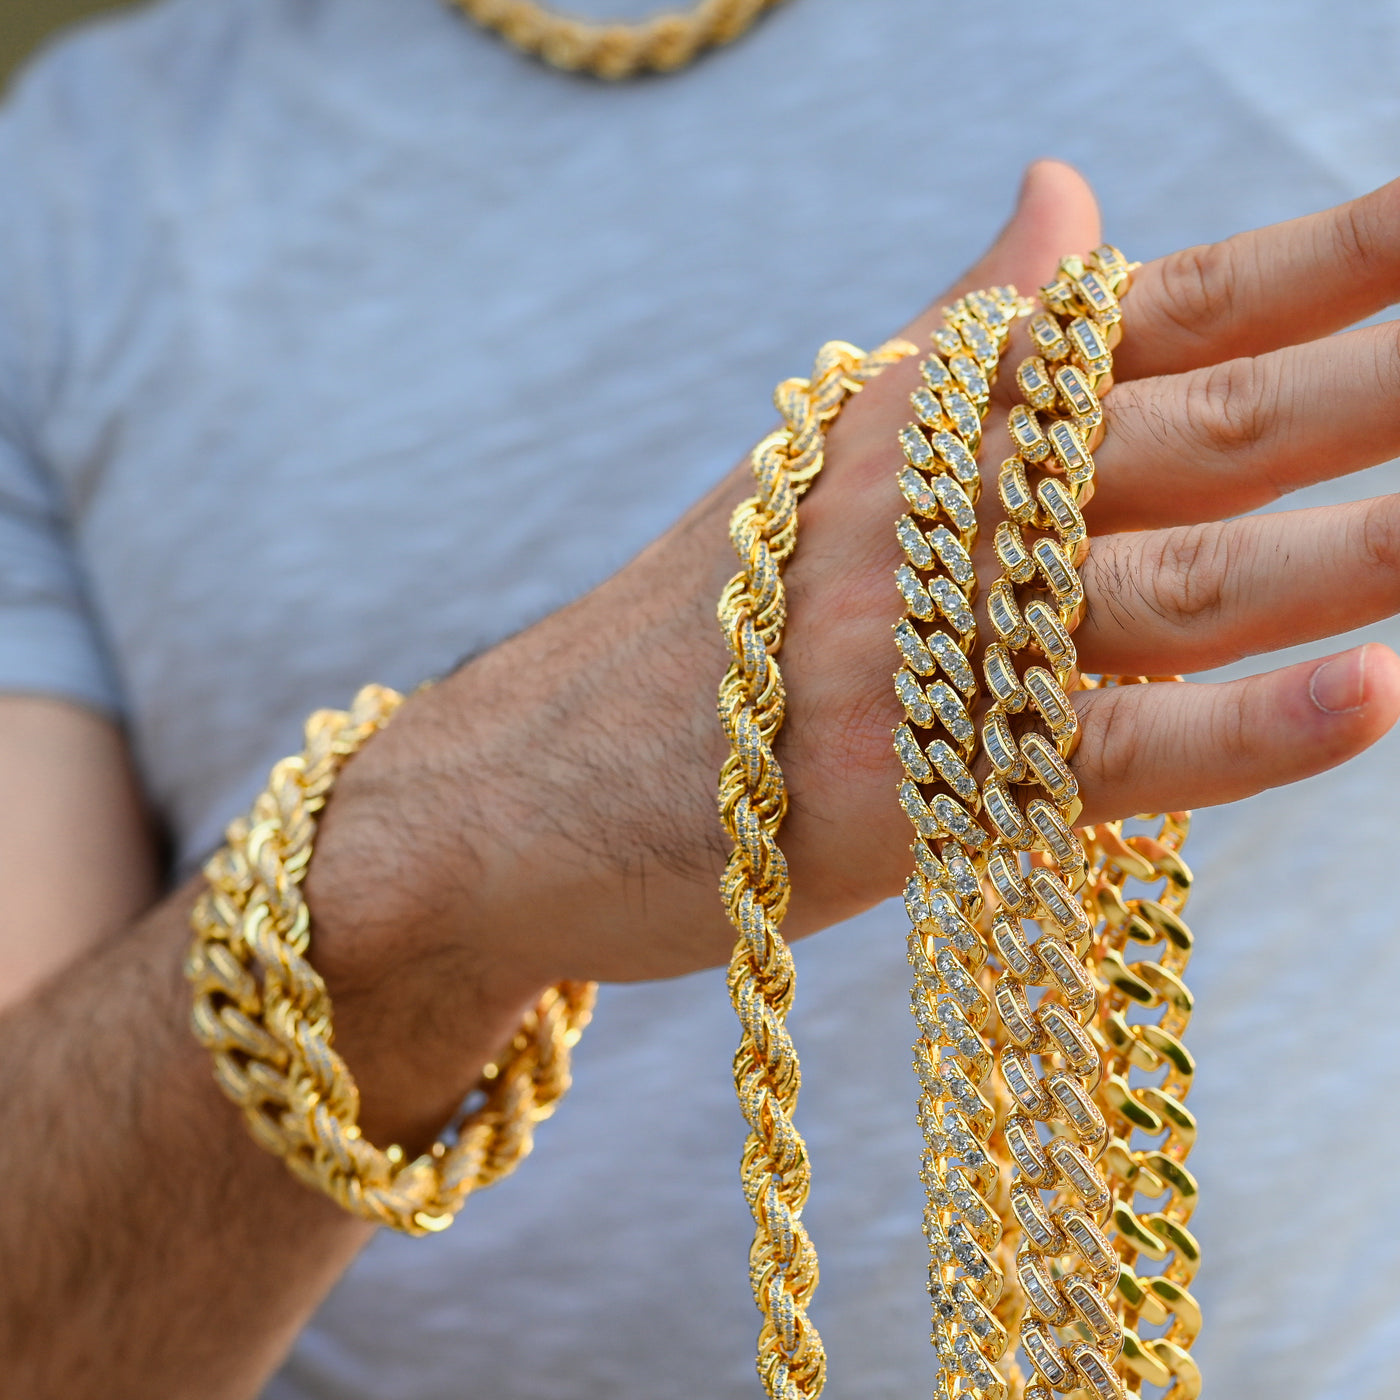 Buy 1 Chain, Get Another For FREE W/ Code: B1G1